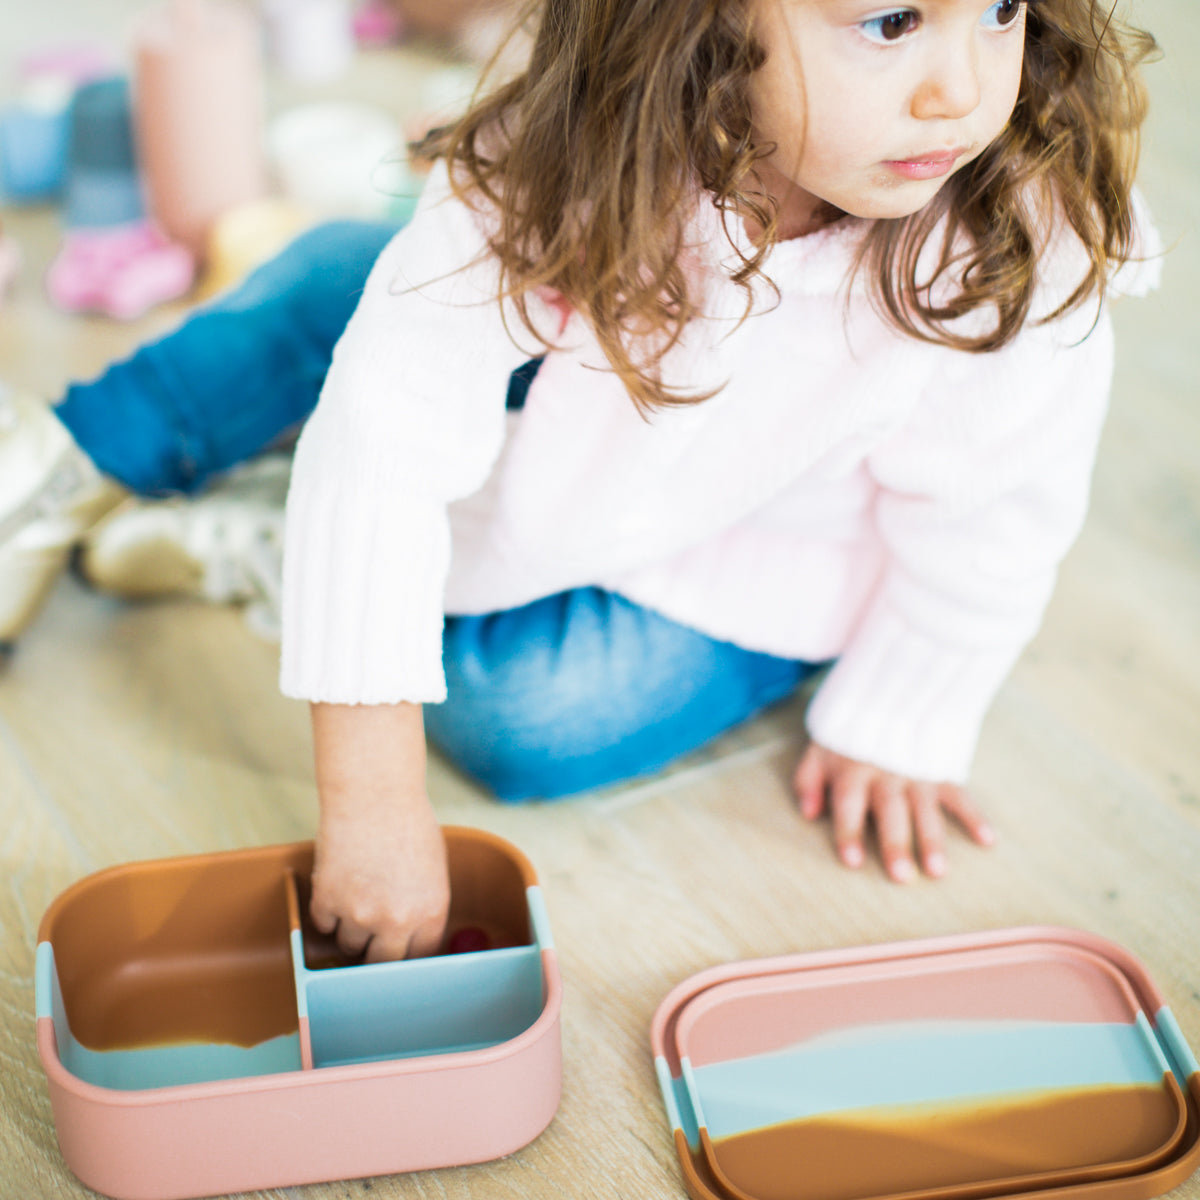 Lunch box in durable bpa free food grade silicone marble effect Sedona terracotta and pink color for kids and adults girls and boys by MKS Miminoo Gilbert Arizona USA on the go 